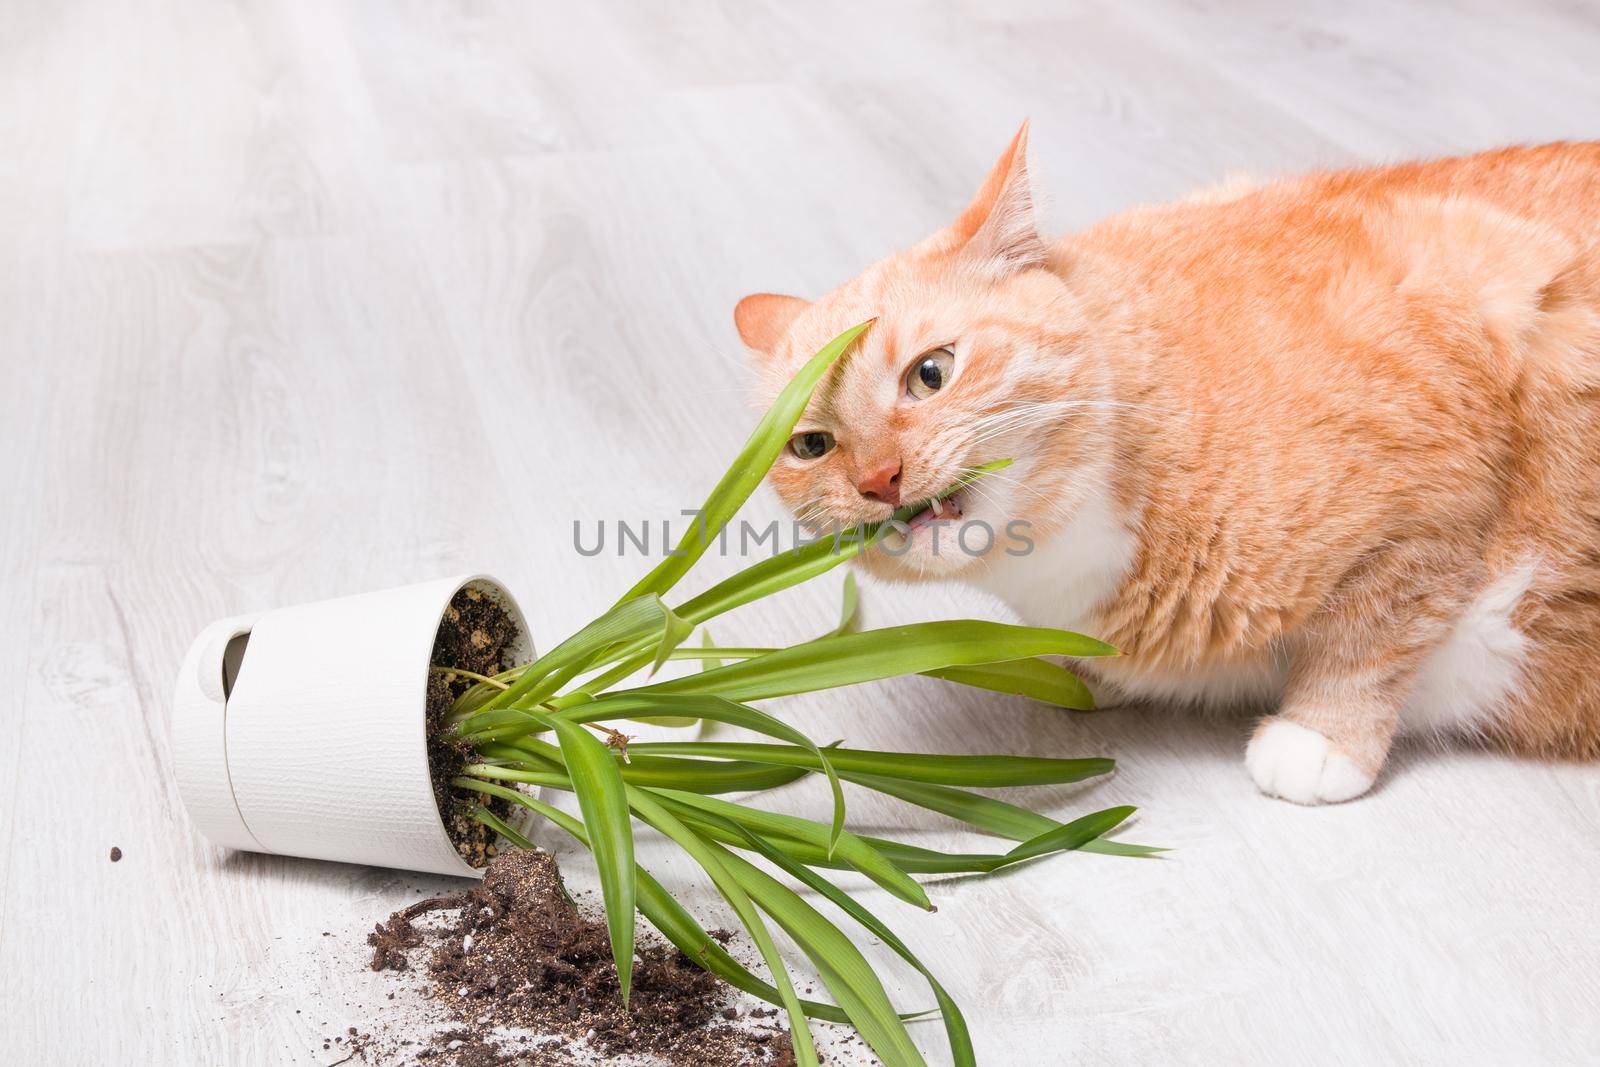 ginger cute fluffy cat nibbles a fallen green plant in a pot, light wooden floor, soil fell out of the pot, copy space, cleaning concept, cat eats grass, cat's mouth with teeth